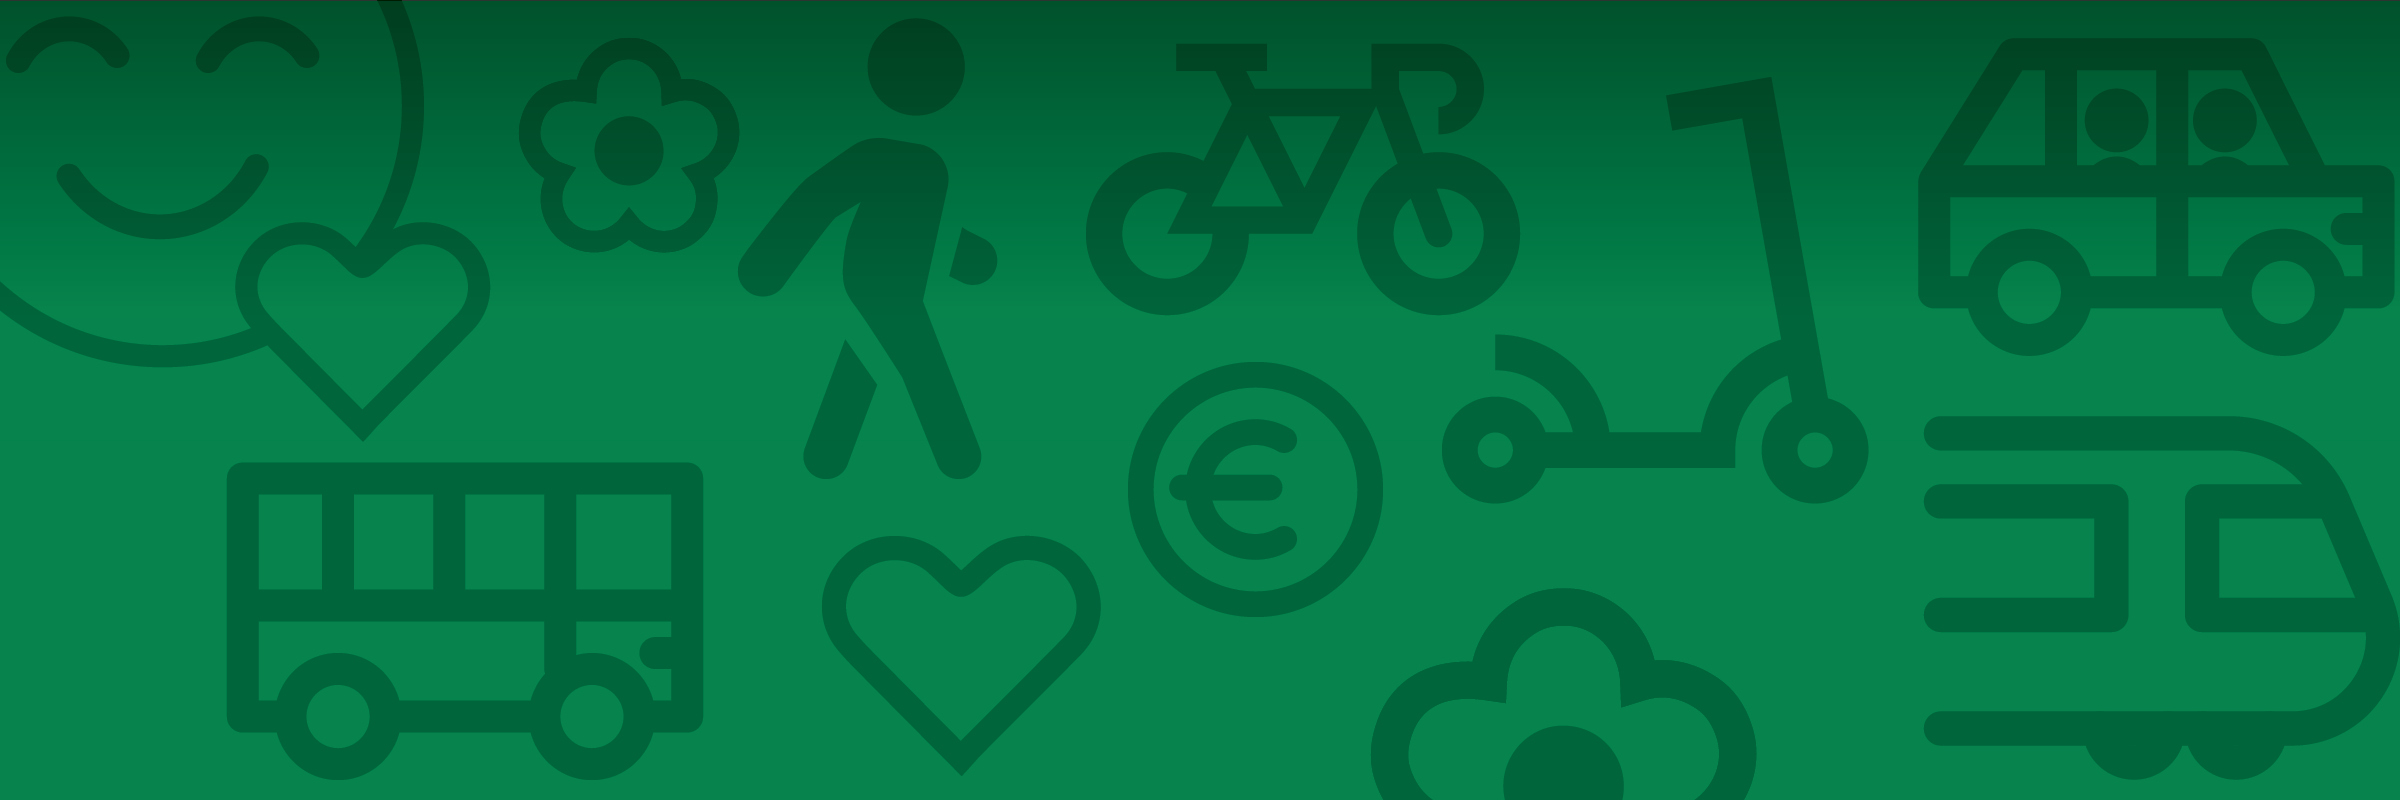 The “Commute Together” campaign promotes sustainable mobility for commuting to and from work